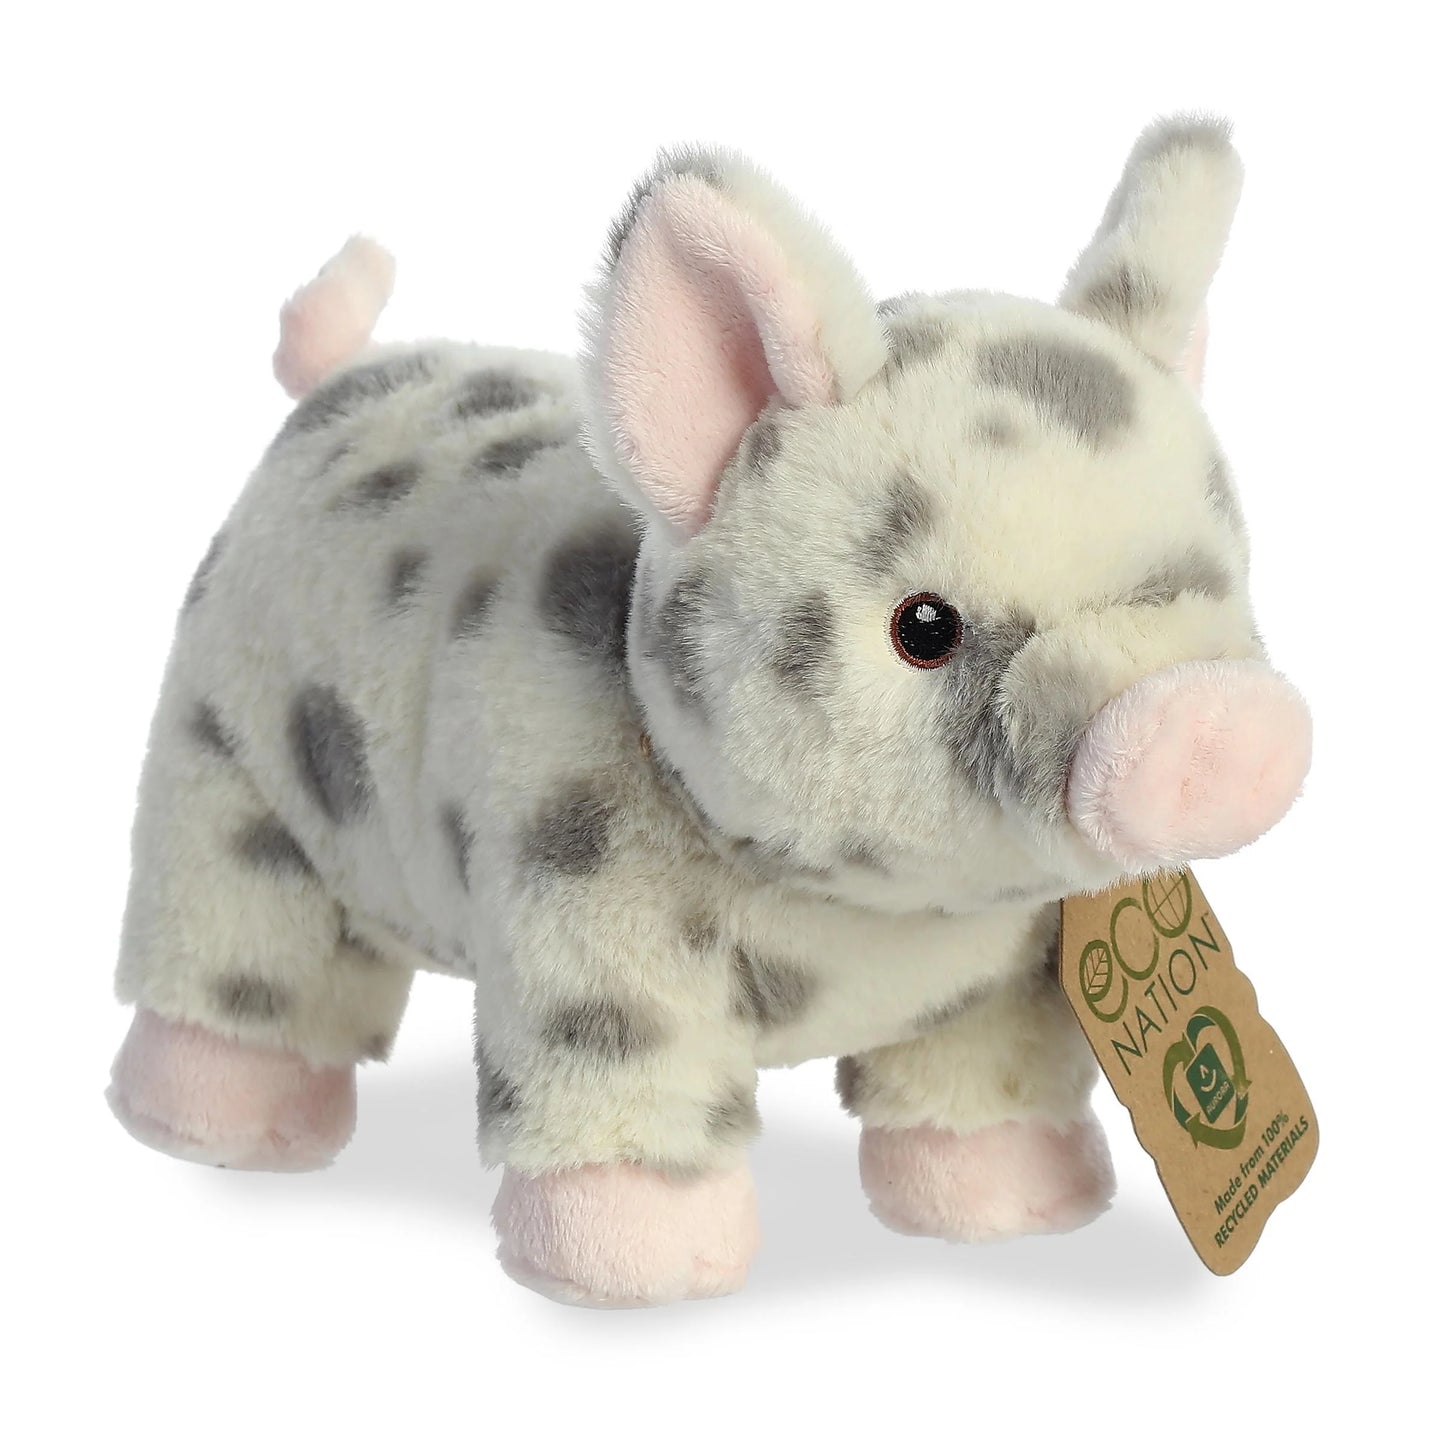 Spotted Pig Plush